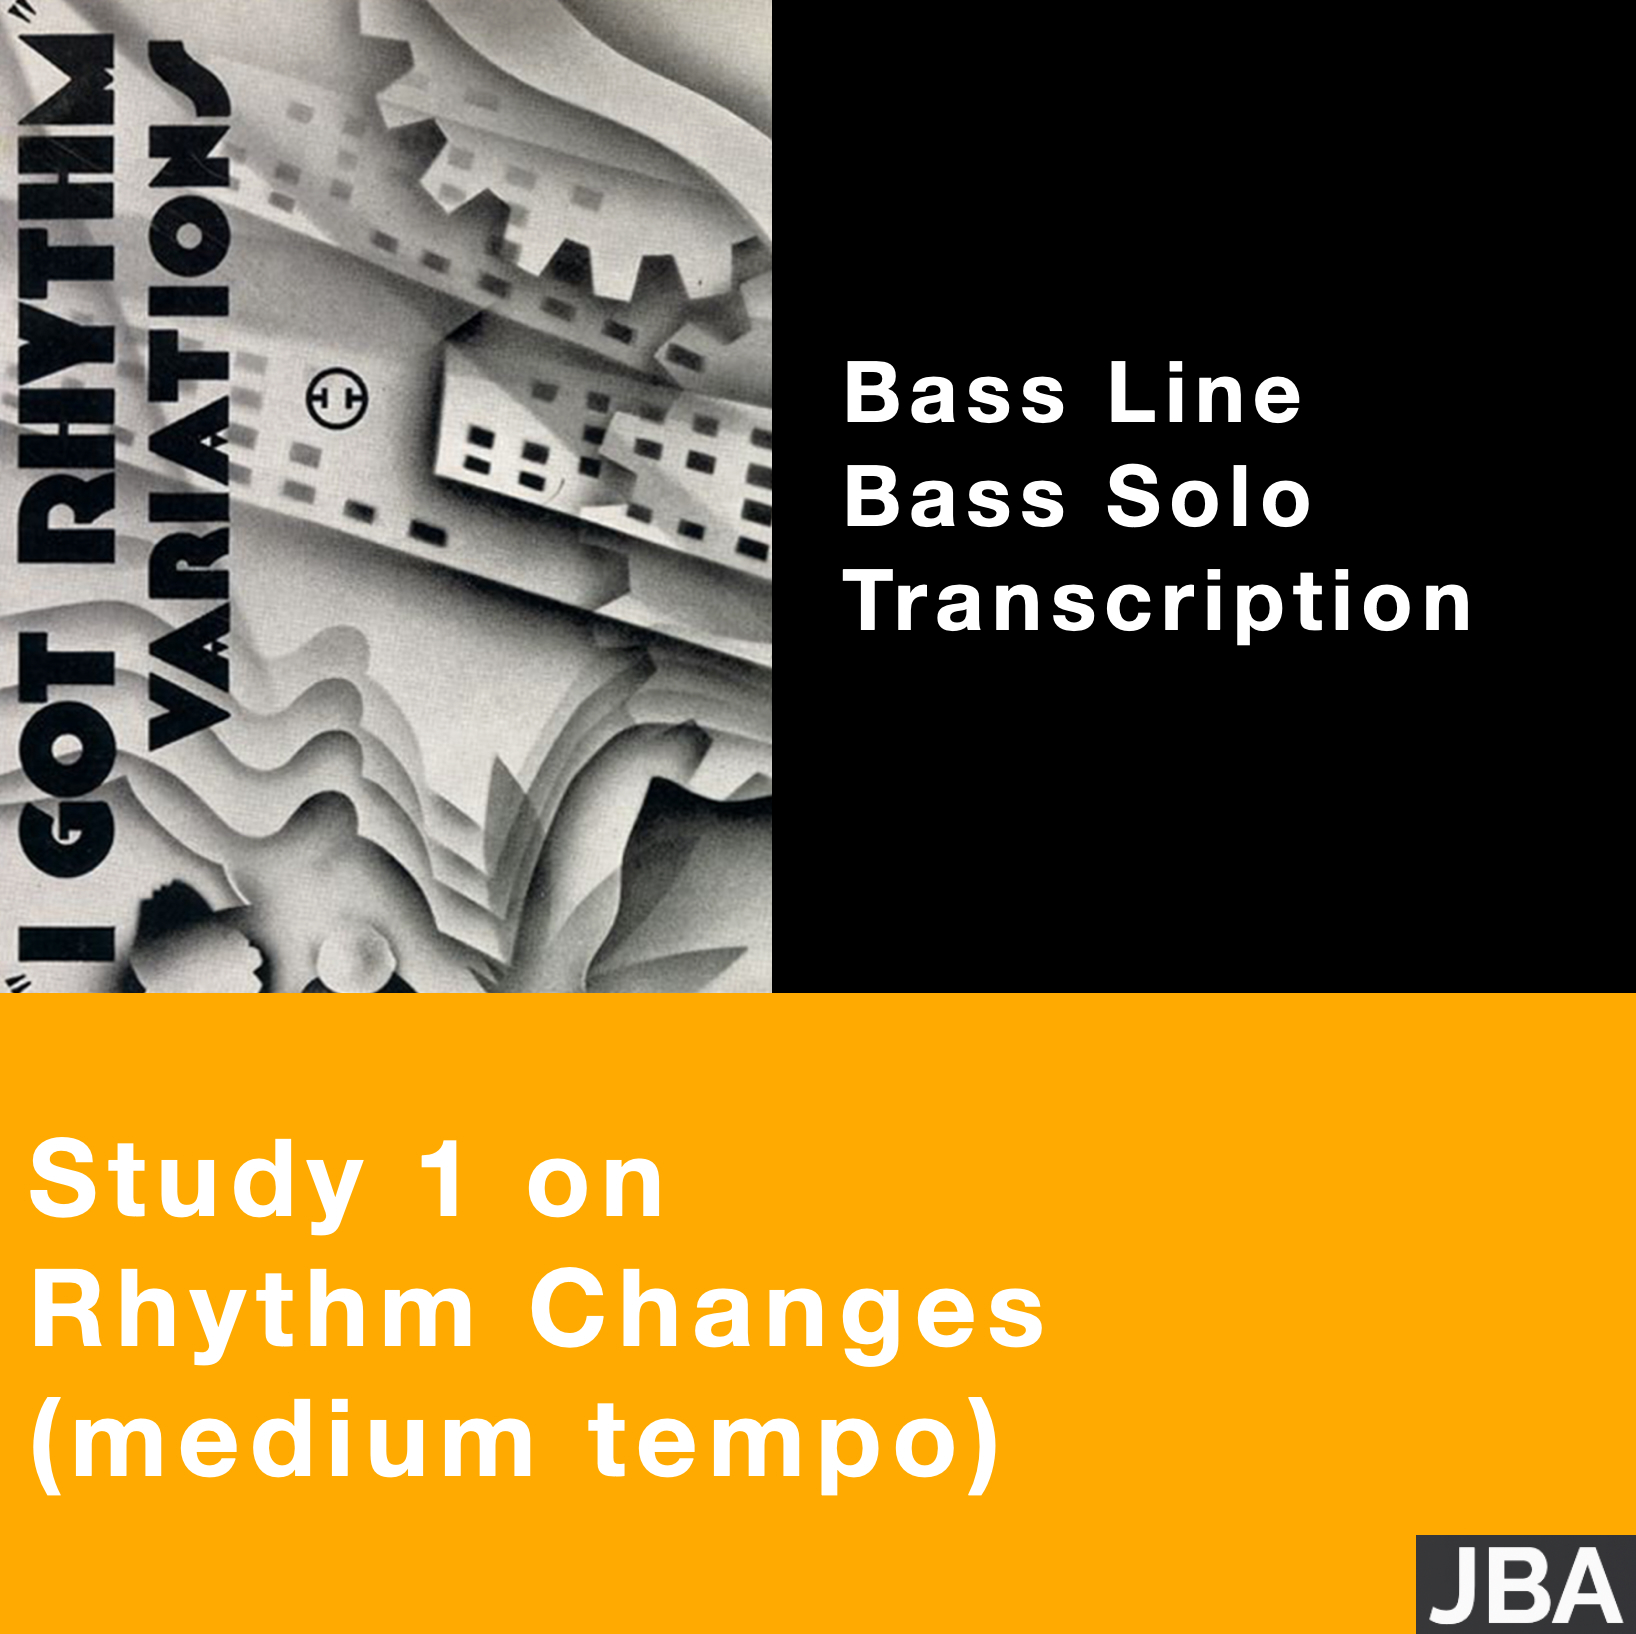 Study 1 on the Rhythm Changes (WITH LESSON INCLUDED)